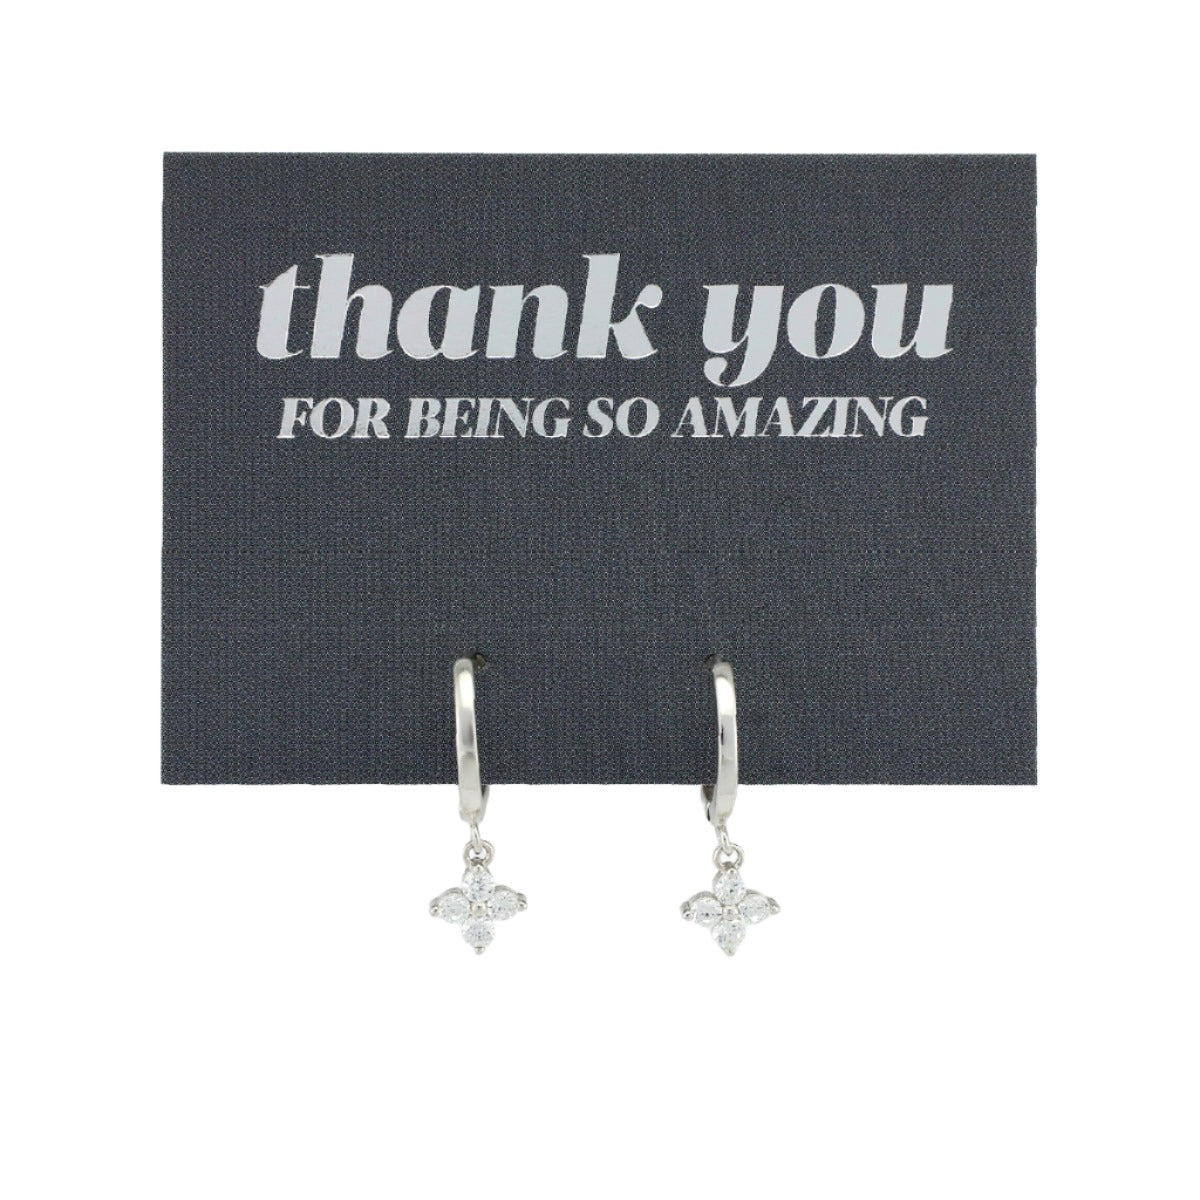 HUGGIES - Thank You For Being So Amazing - Sterling Silver Hoops with Cubic Zirconia Star Charm (2302-F)